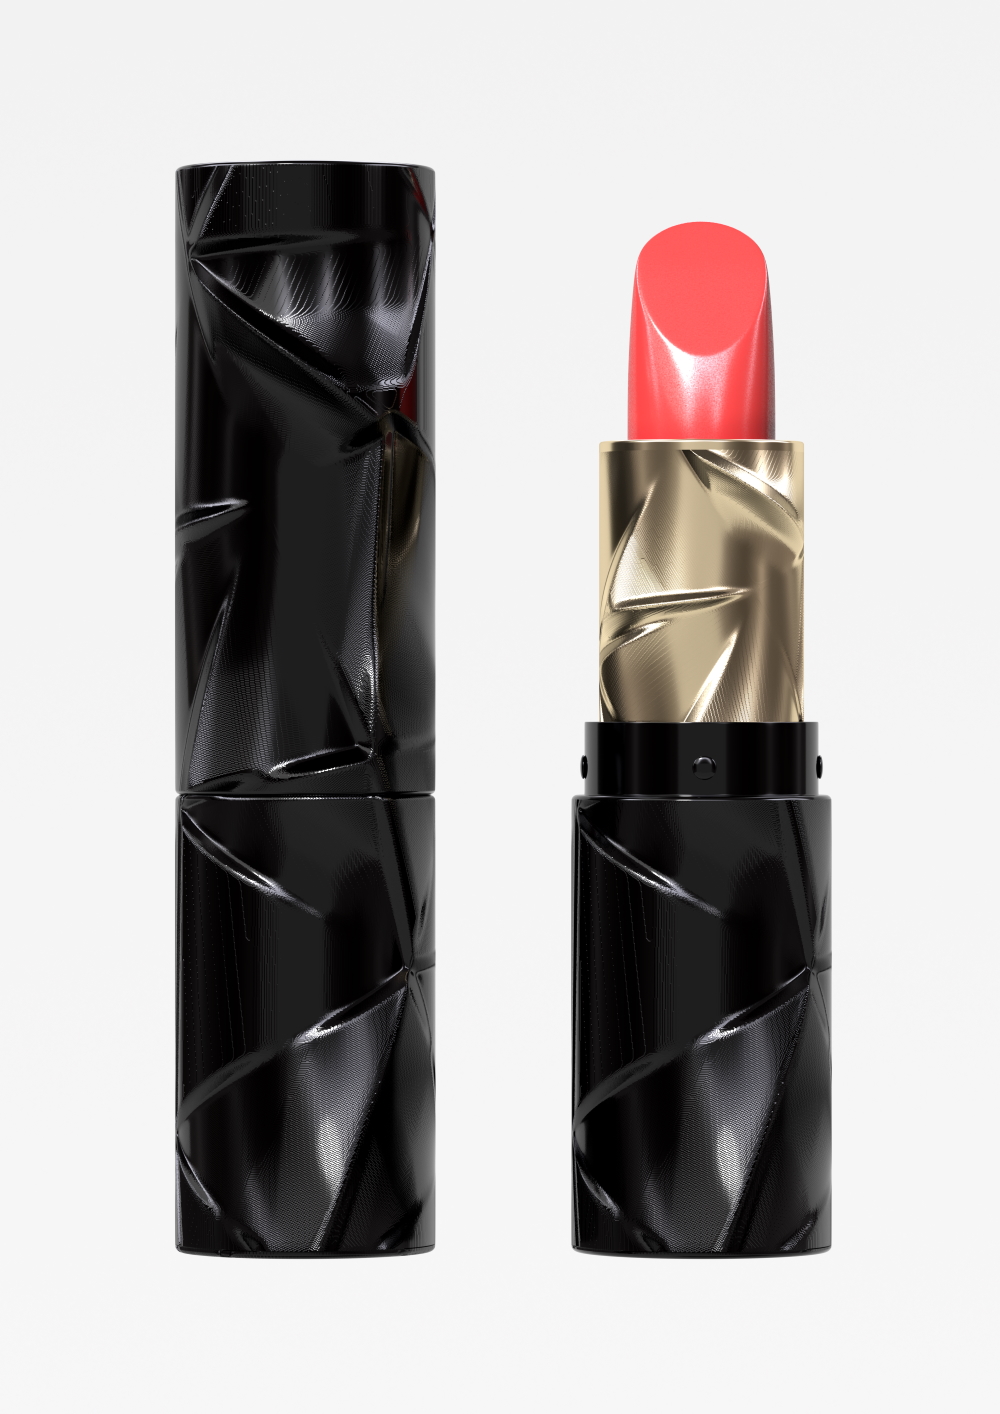 'Cheeky', the new and innovative lipstick concept from 'The HeART of Design'.